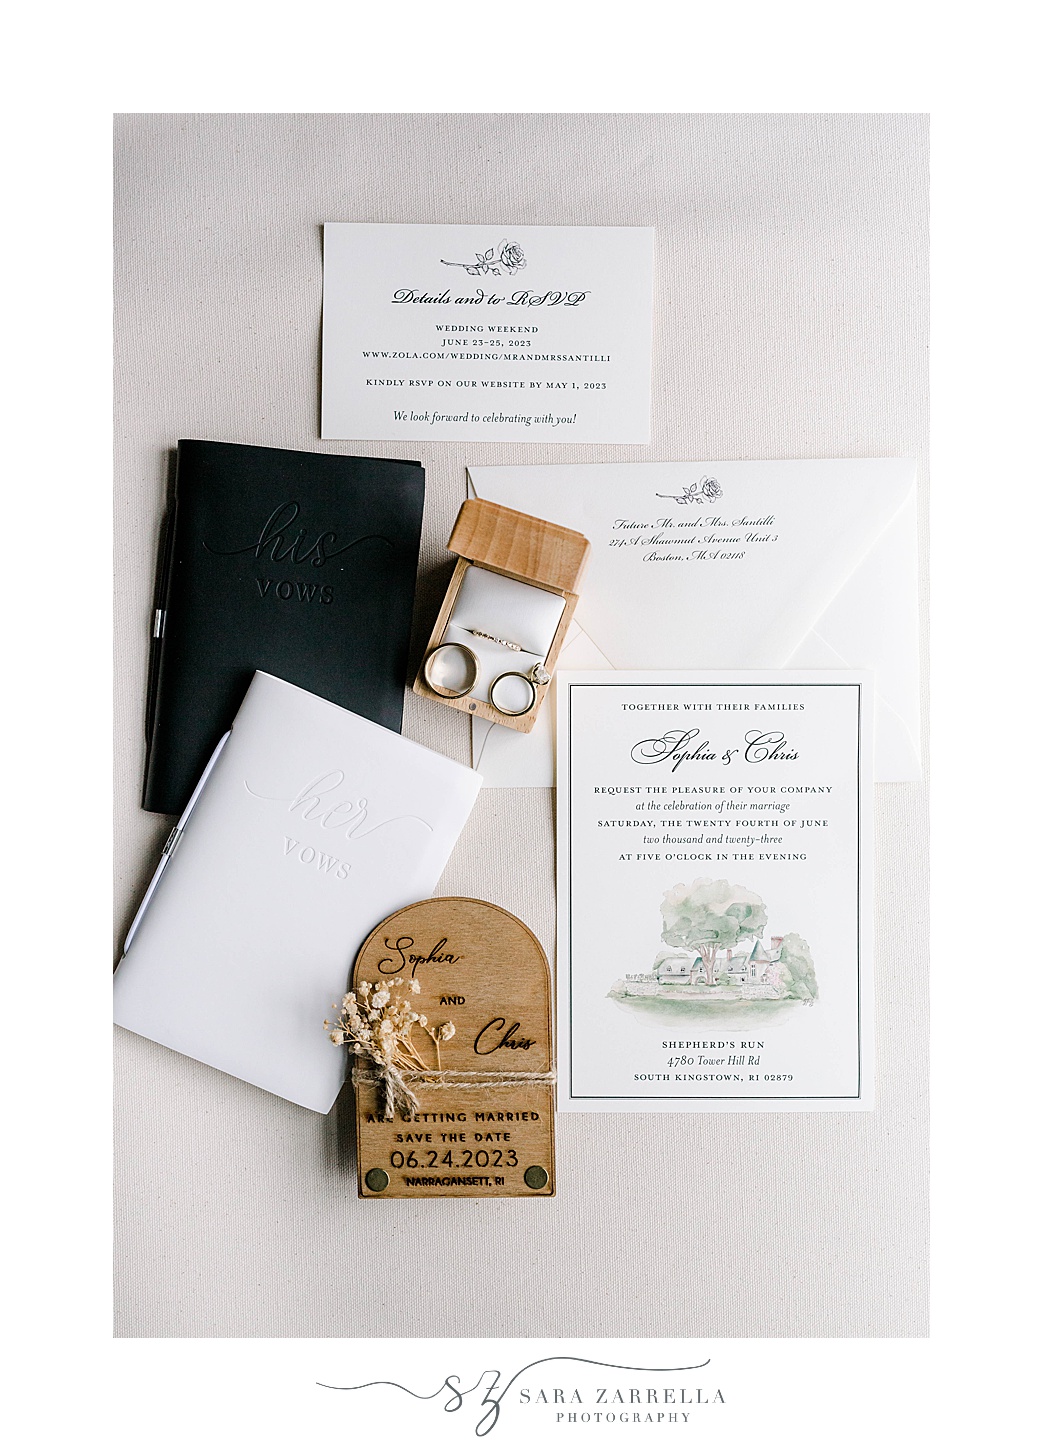 bride's jewelry, custom invitation suite, and vows booklets for summer wedding at Shepard's Run